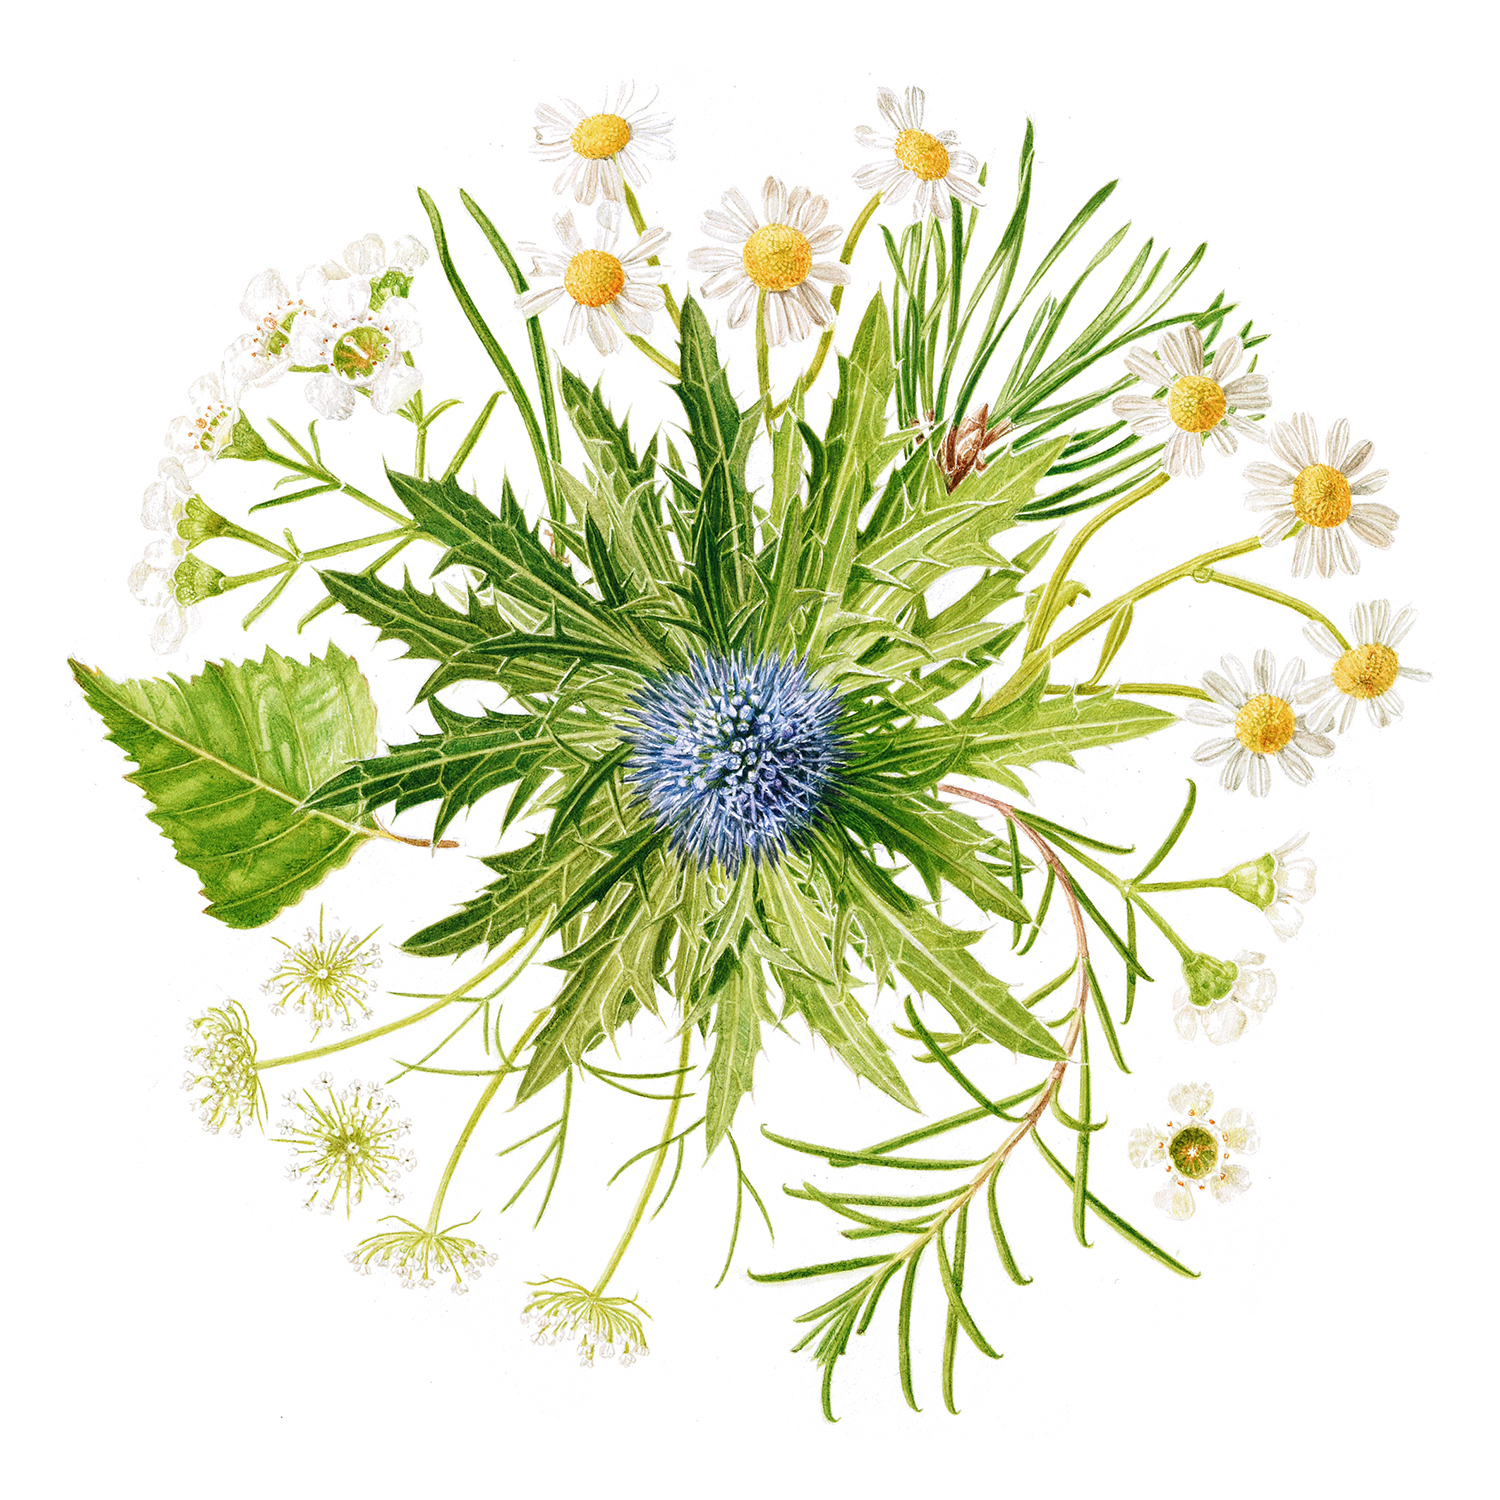 Bouquet - a watercolour painting, a commission based on a bridal bouquet, featuring daisies, wax flower, eryngium, pine, birch and ami by Marianne Hazlewood